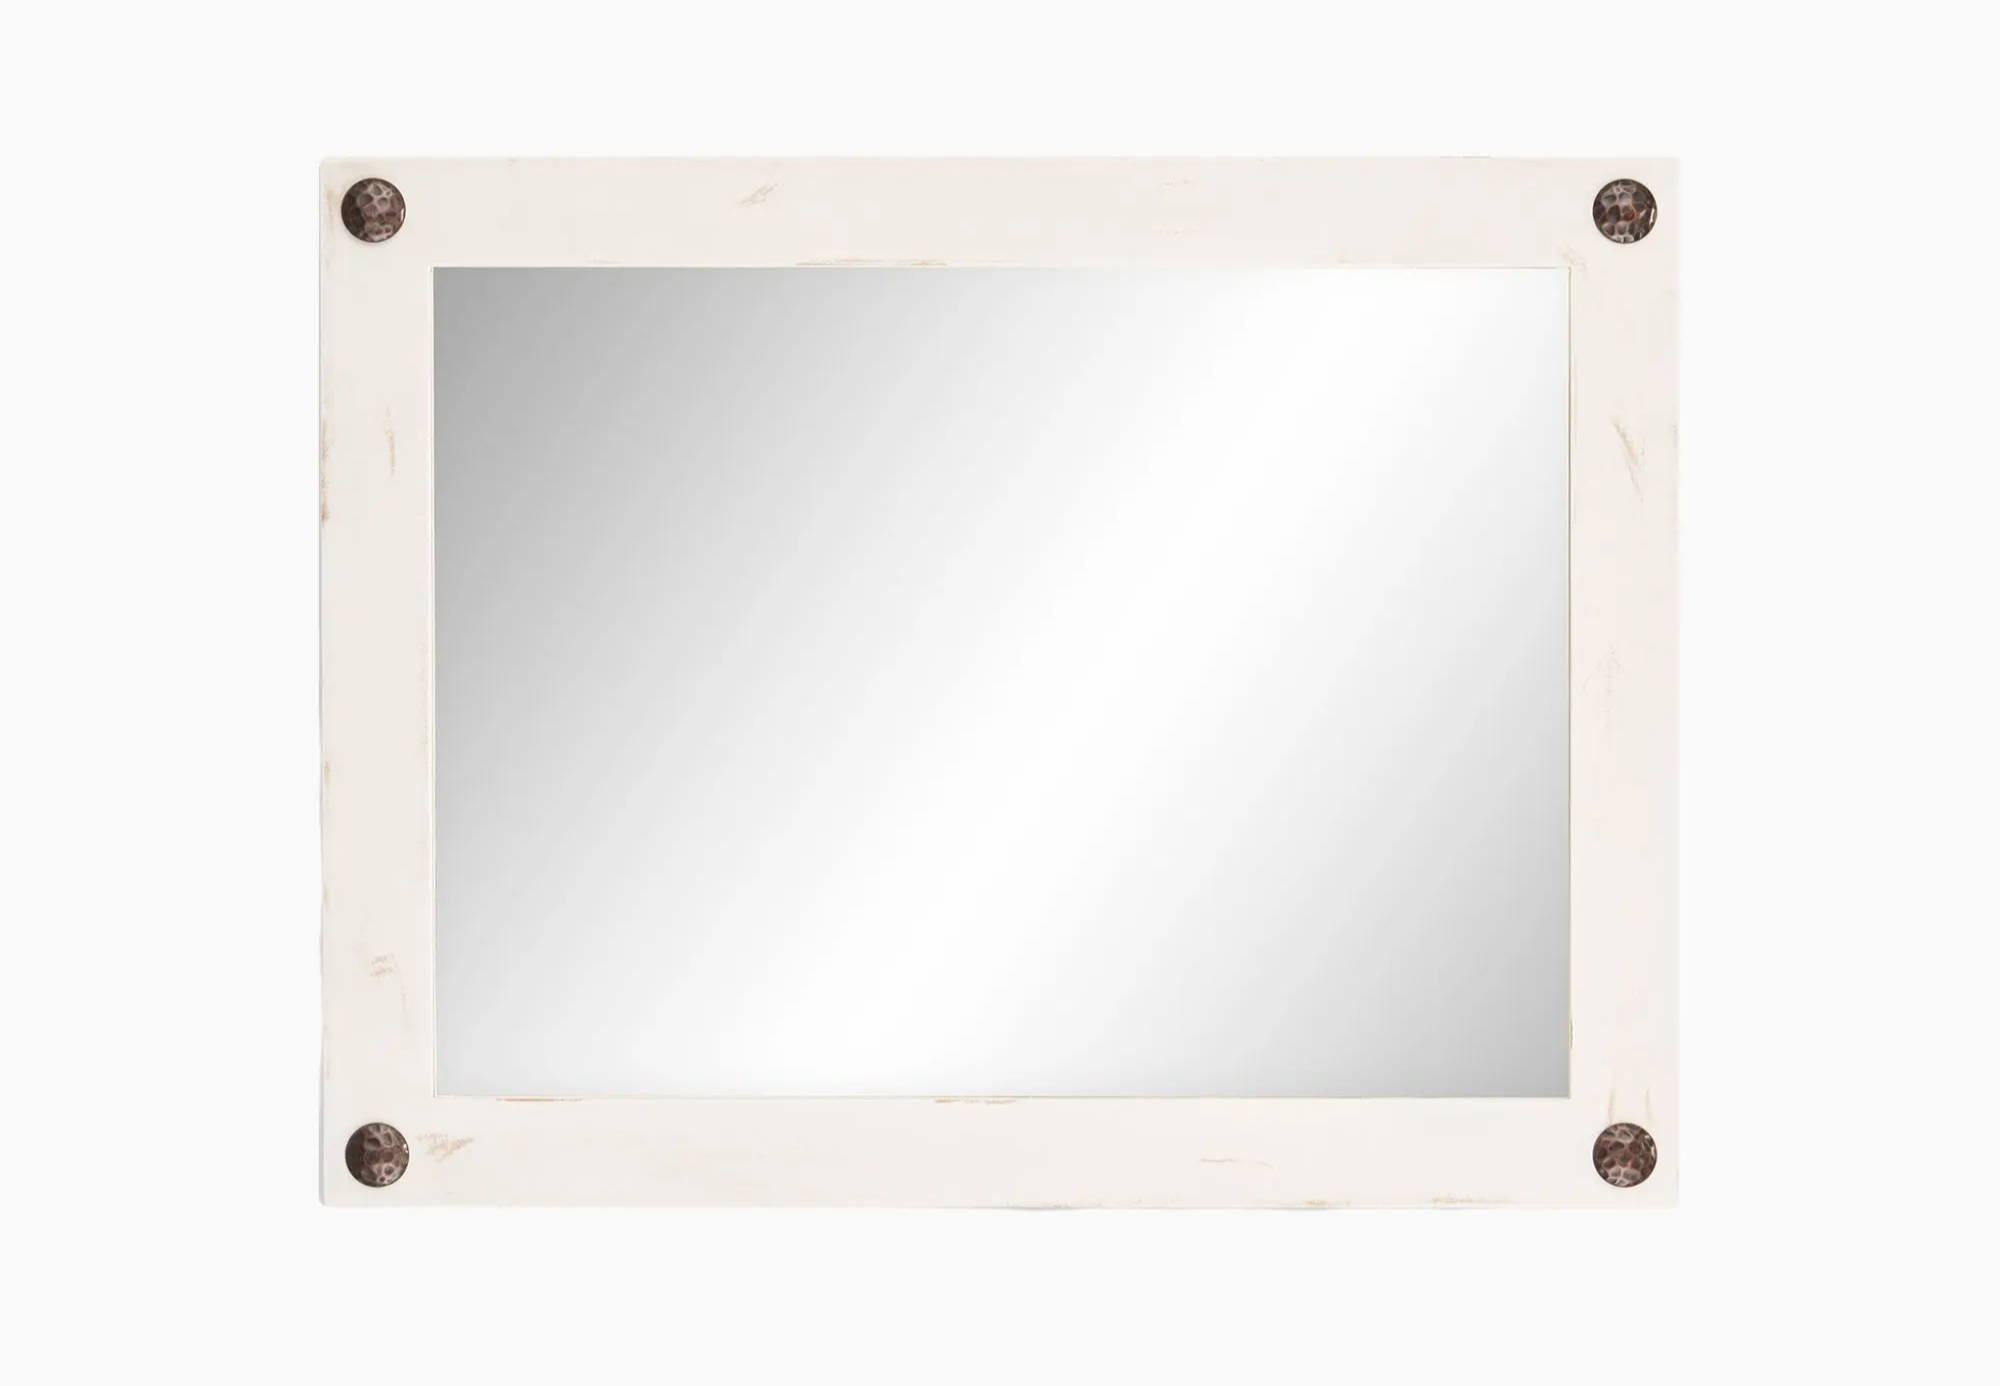 Wide white vanity mirror with wood frames and accents